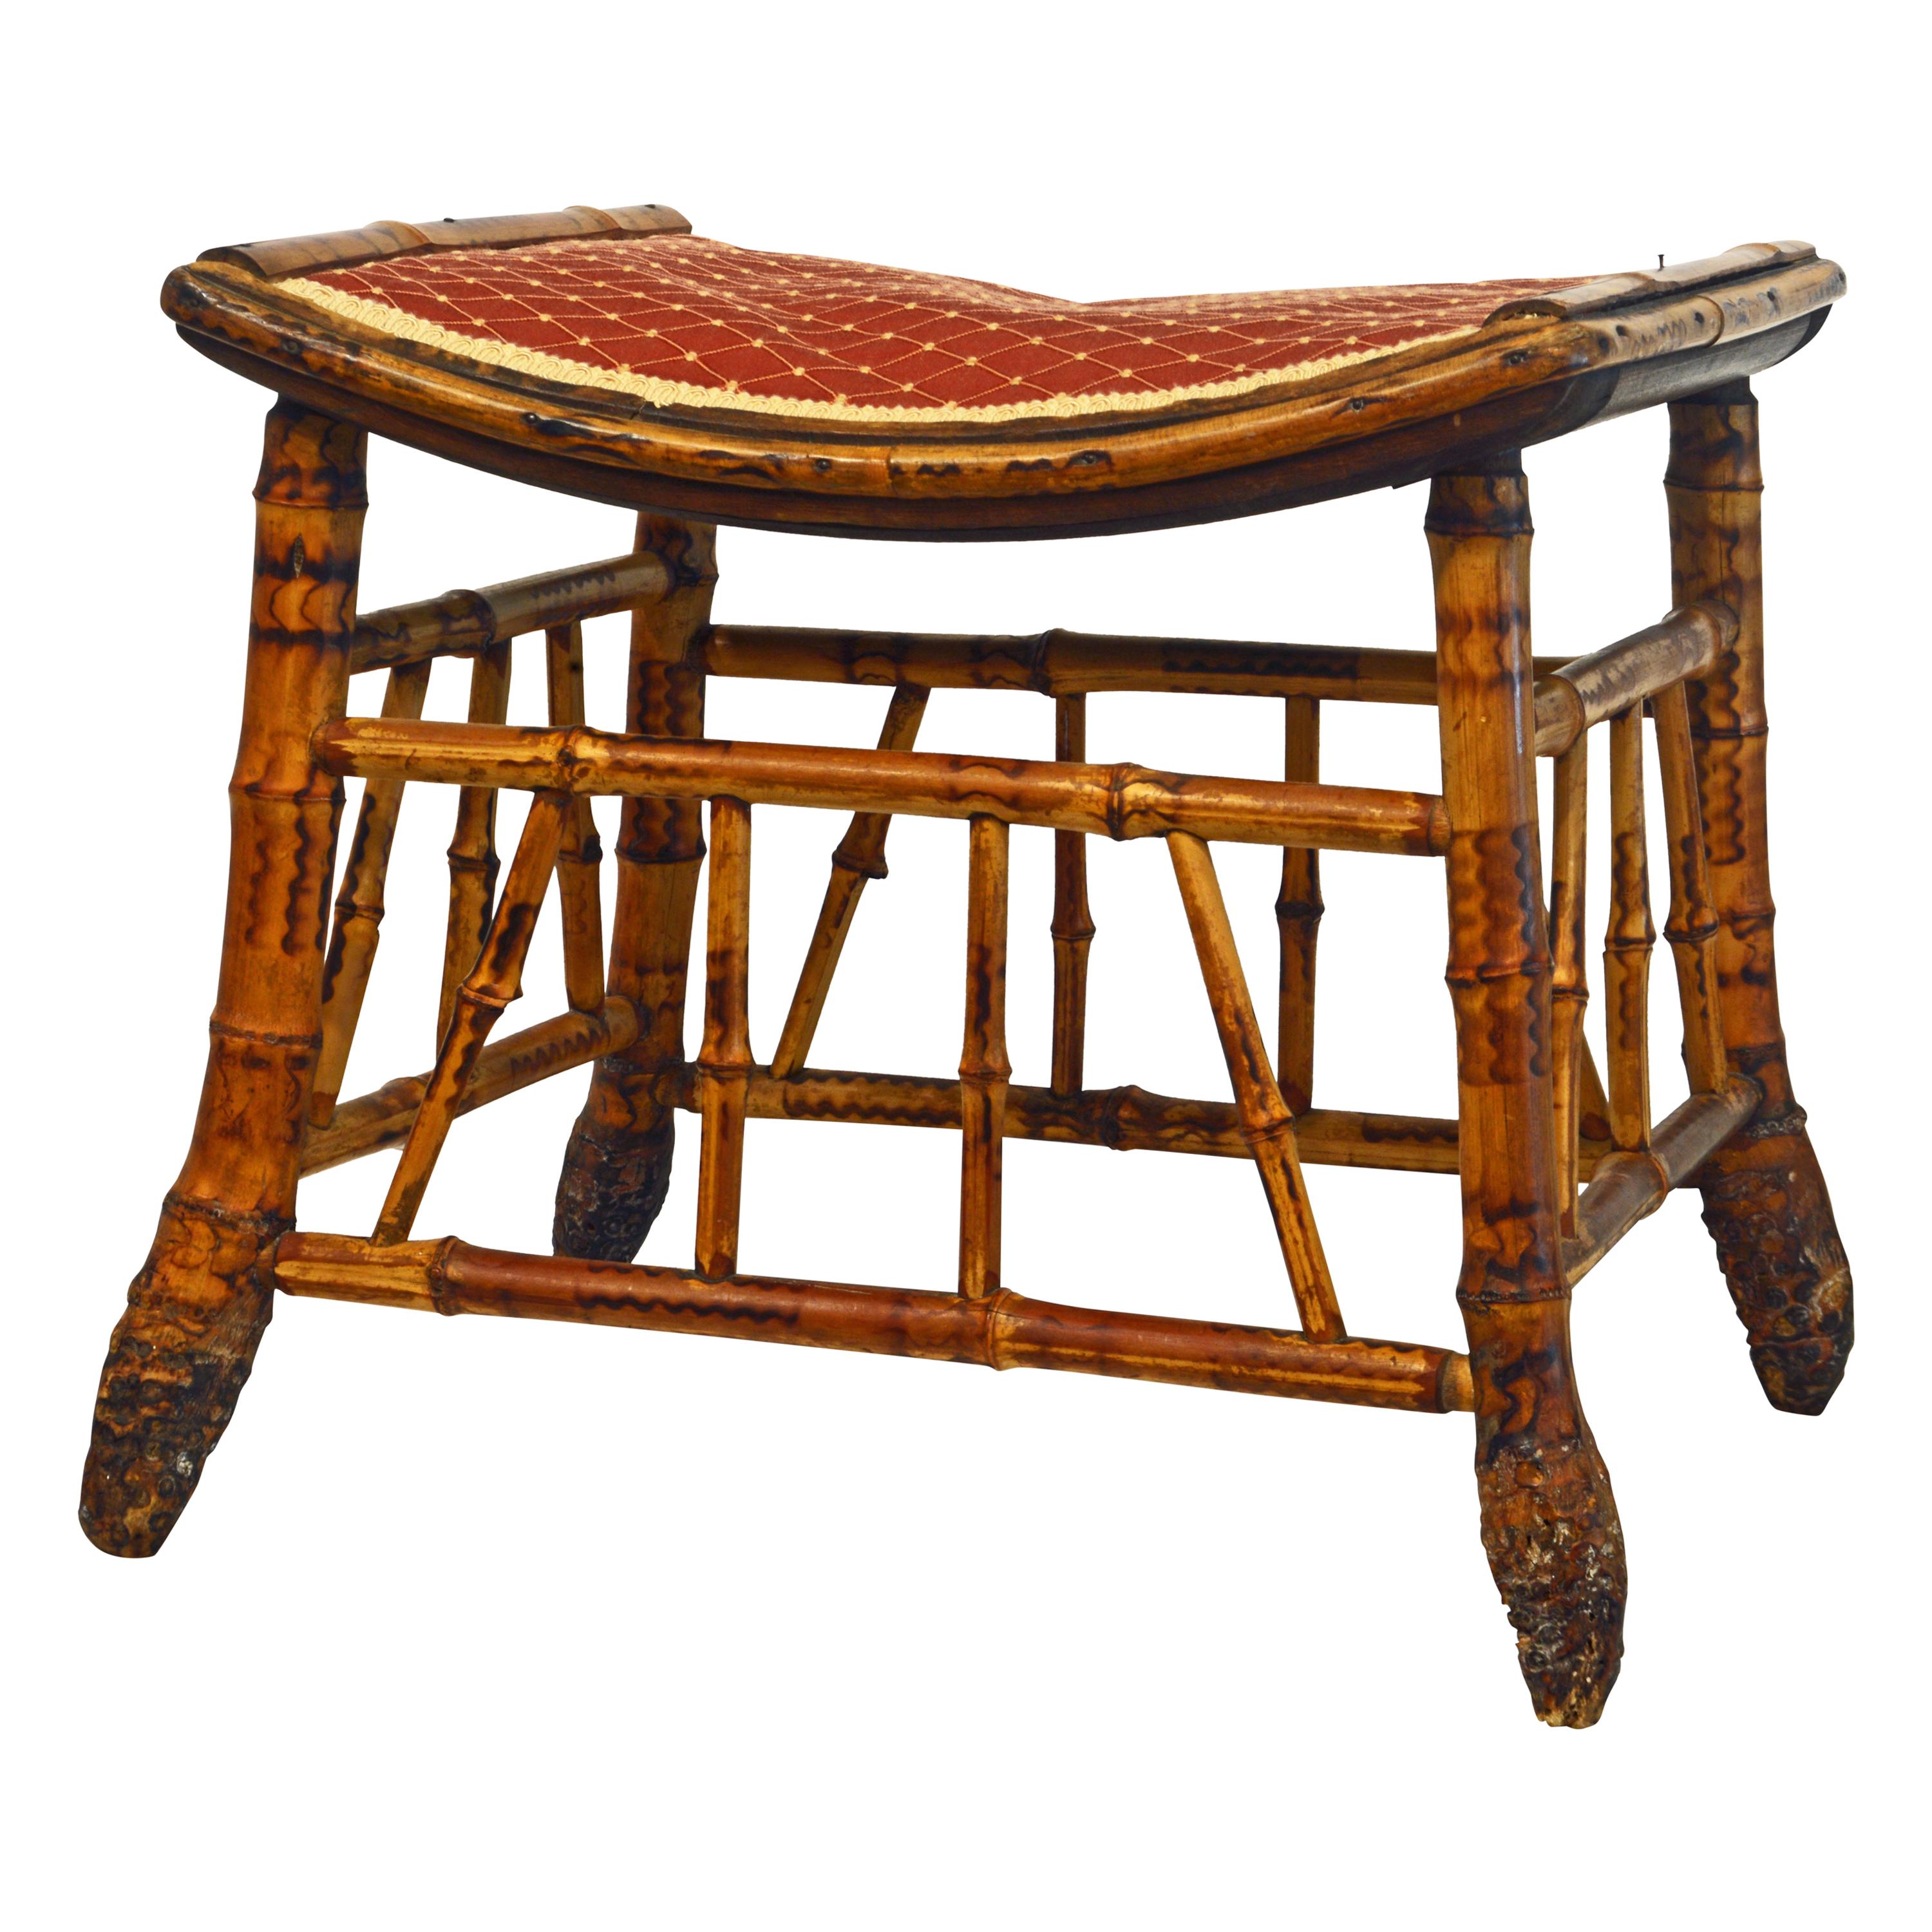 Unusual English Burned Bamboo Stool or Bench with Fabric Cover Late 19th Century